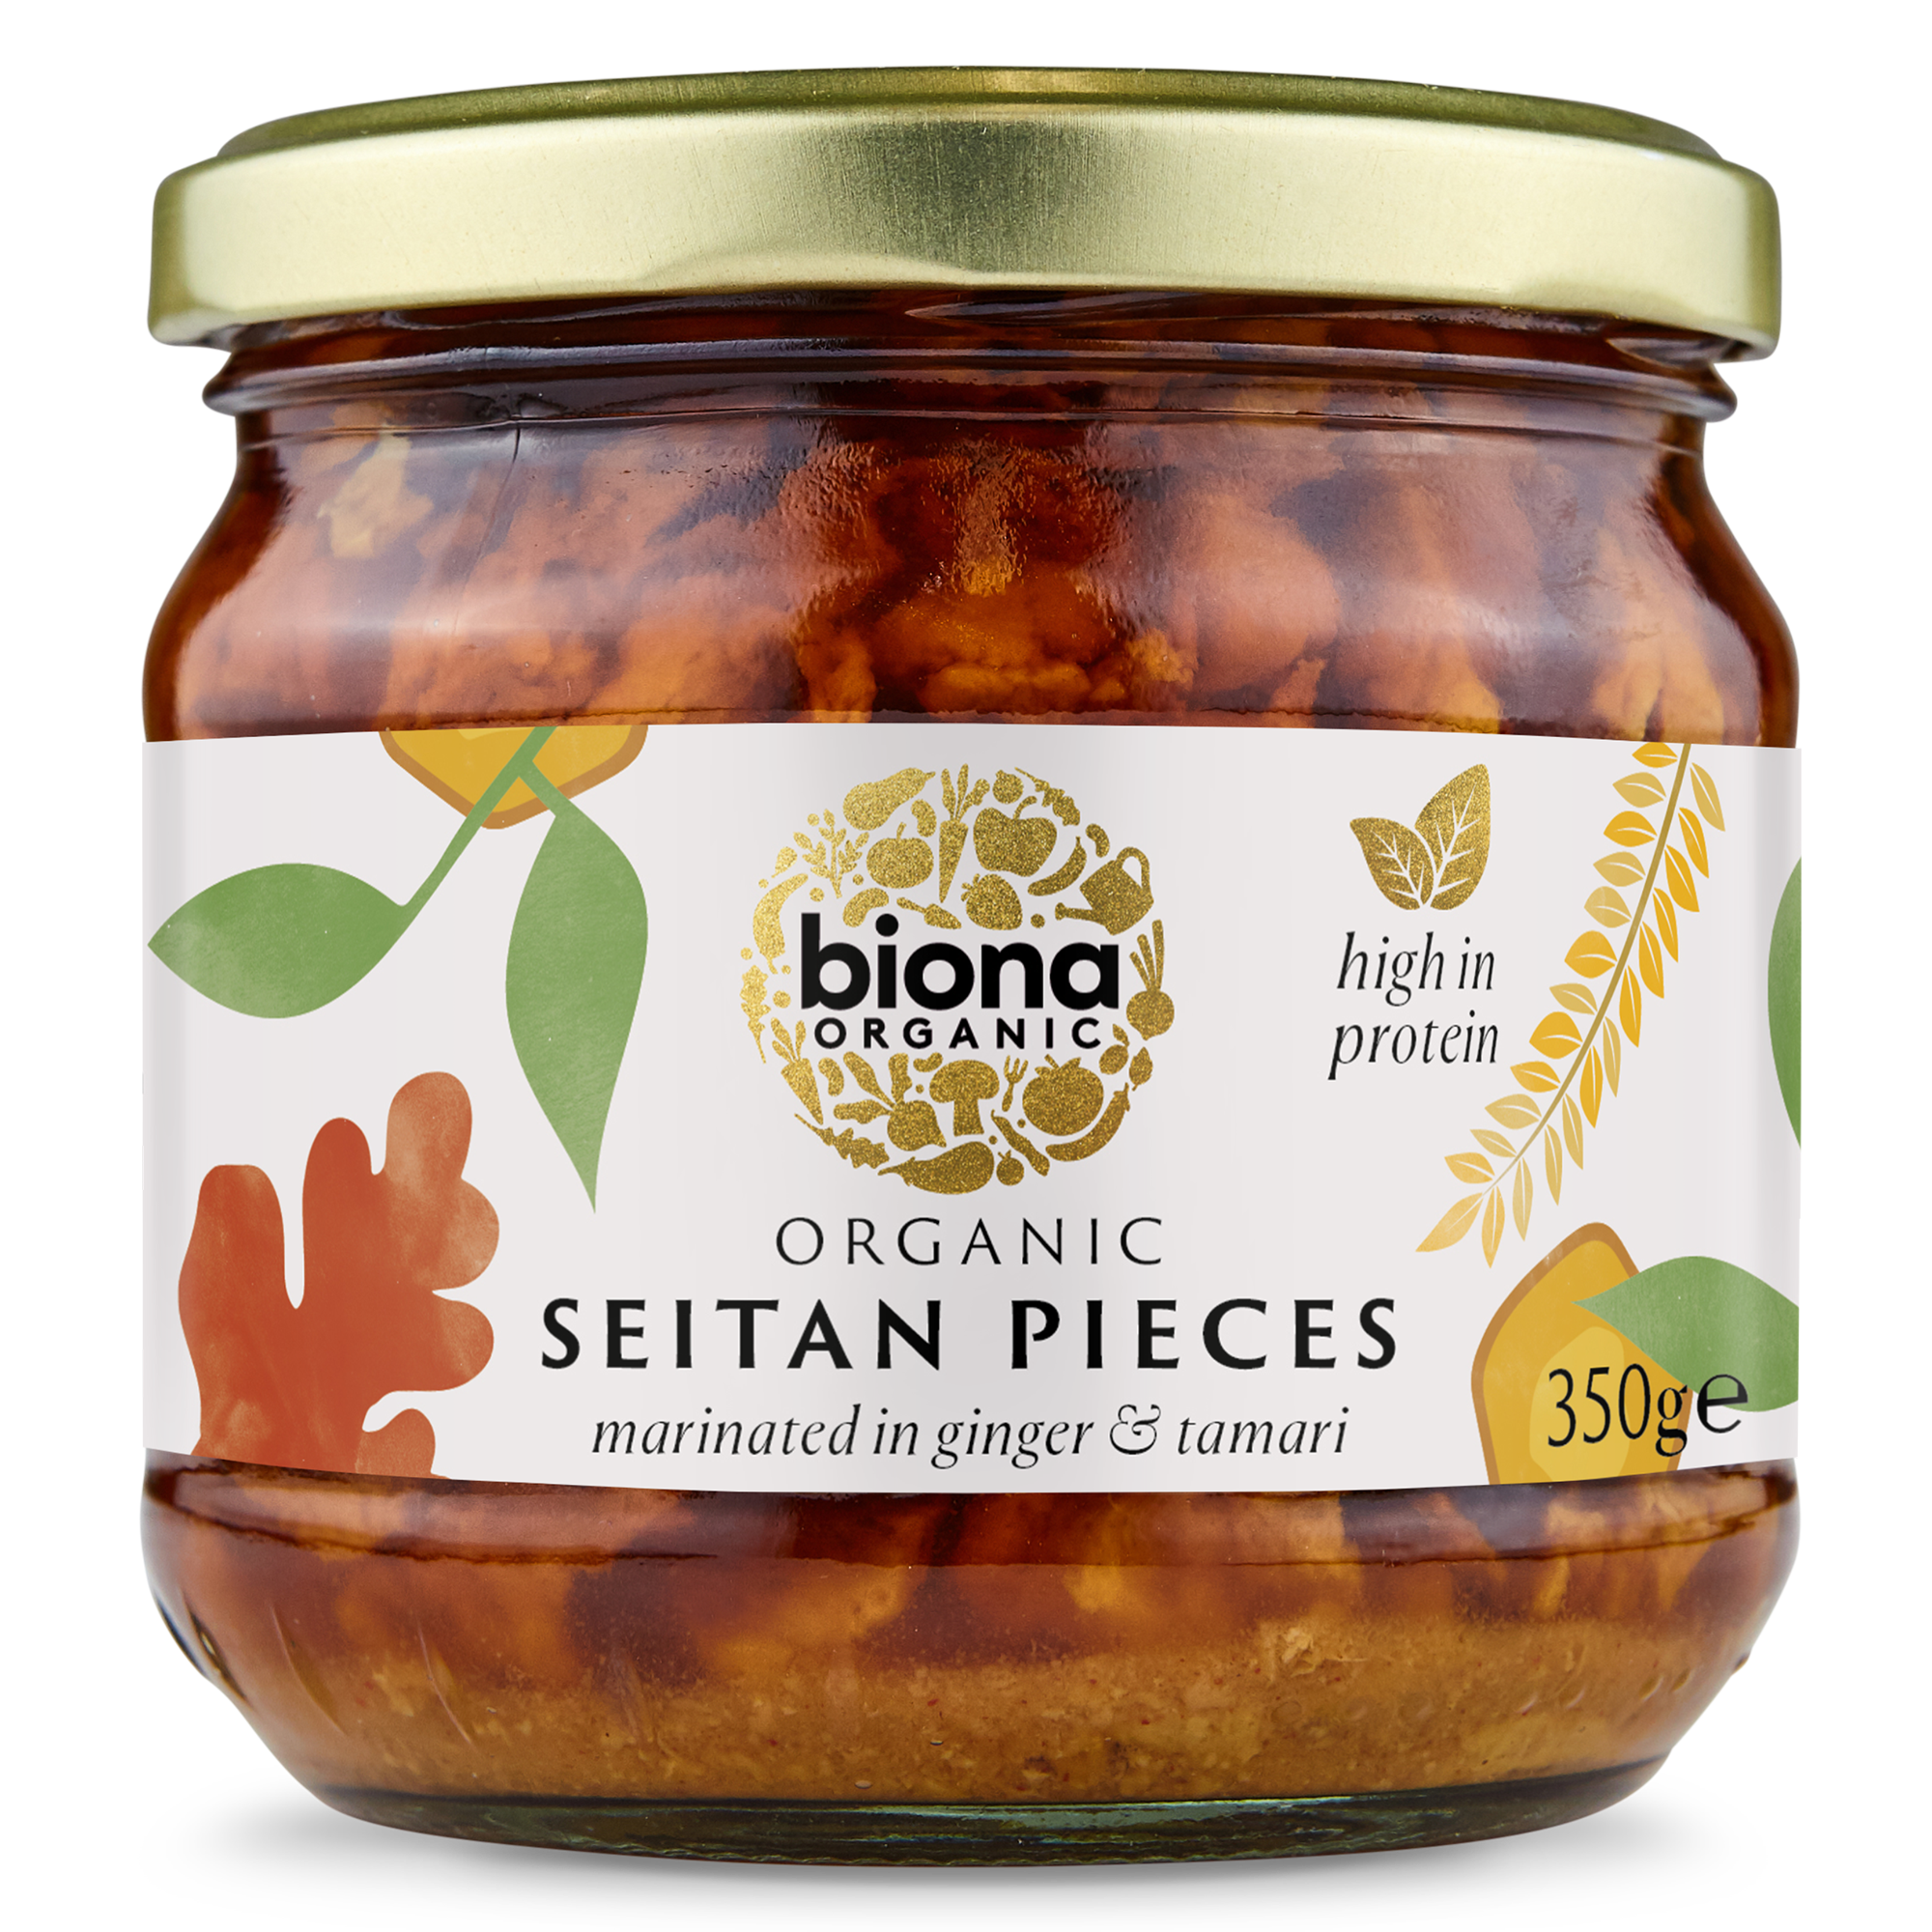 SEITAN PIECES IN GINGER AND SOYA SAUCE